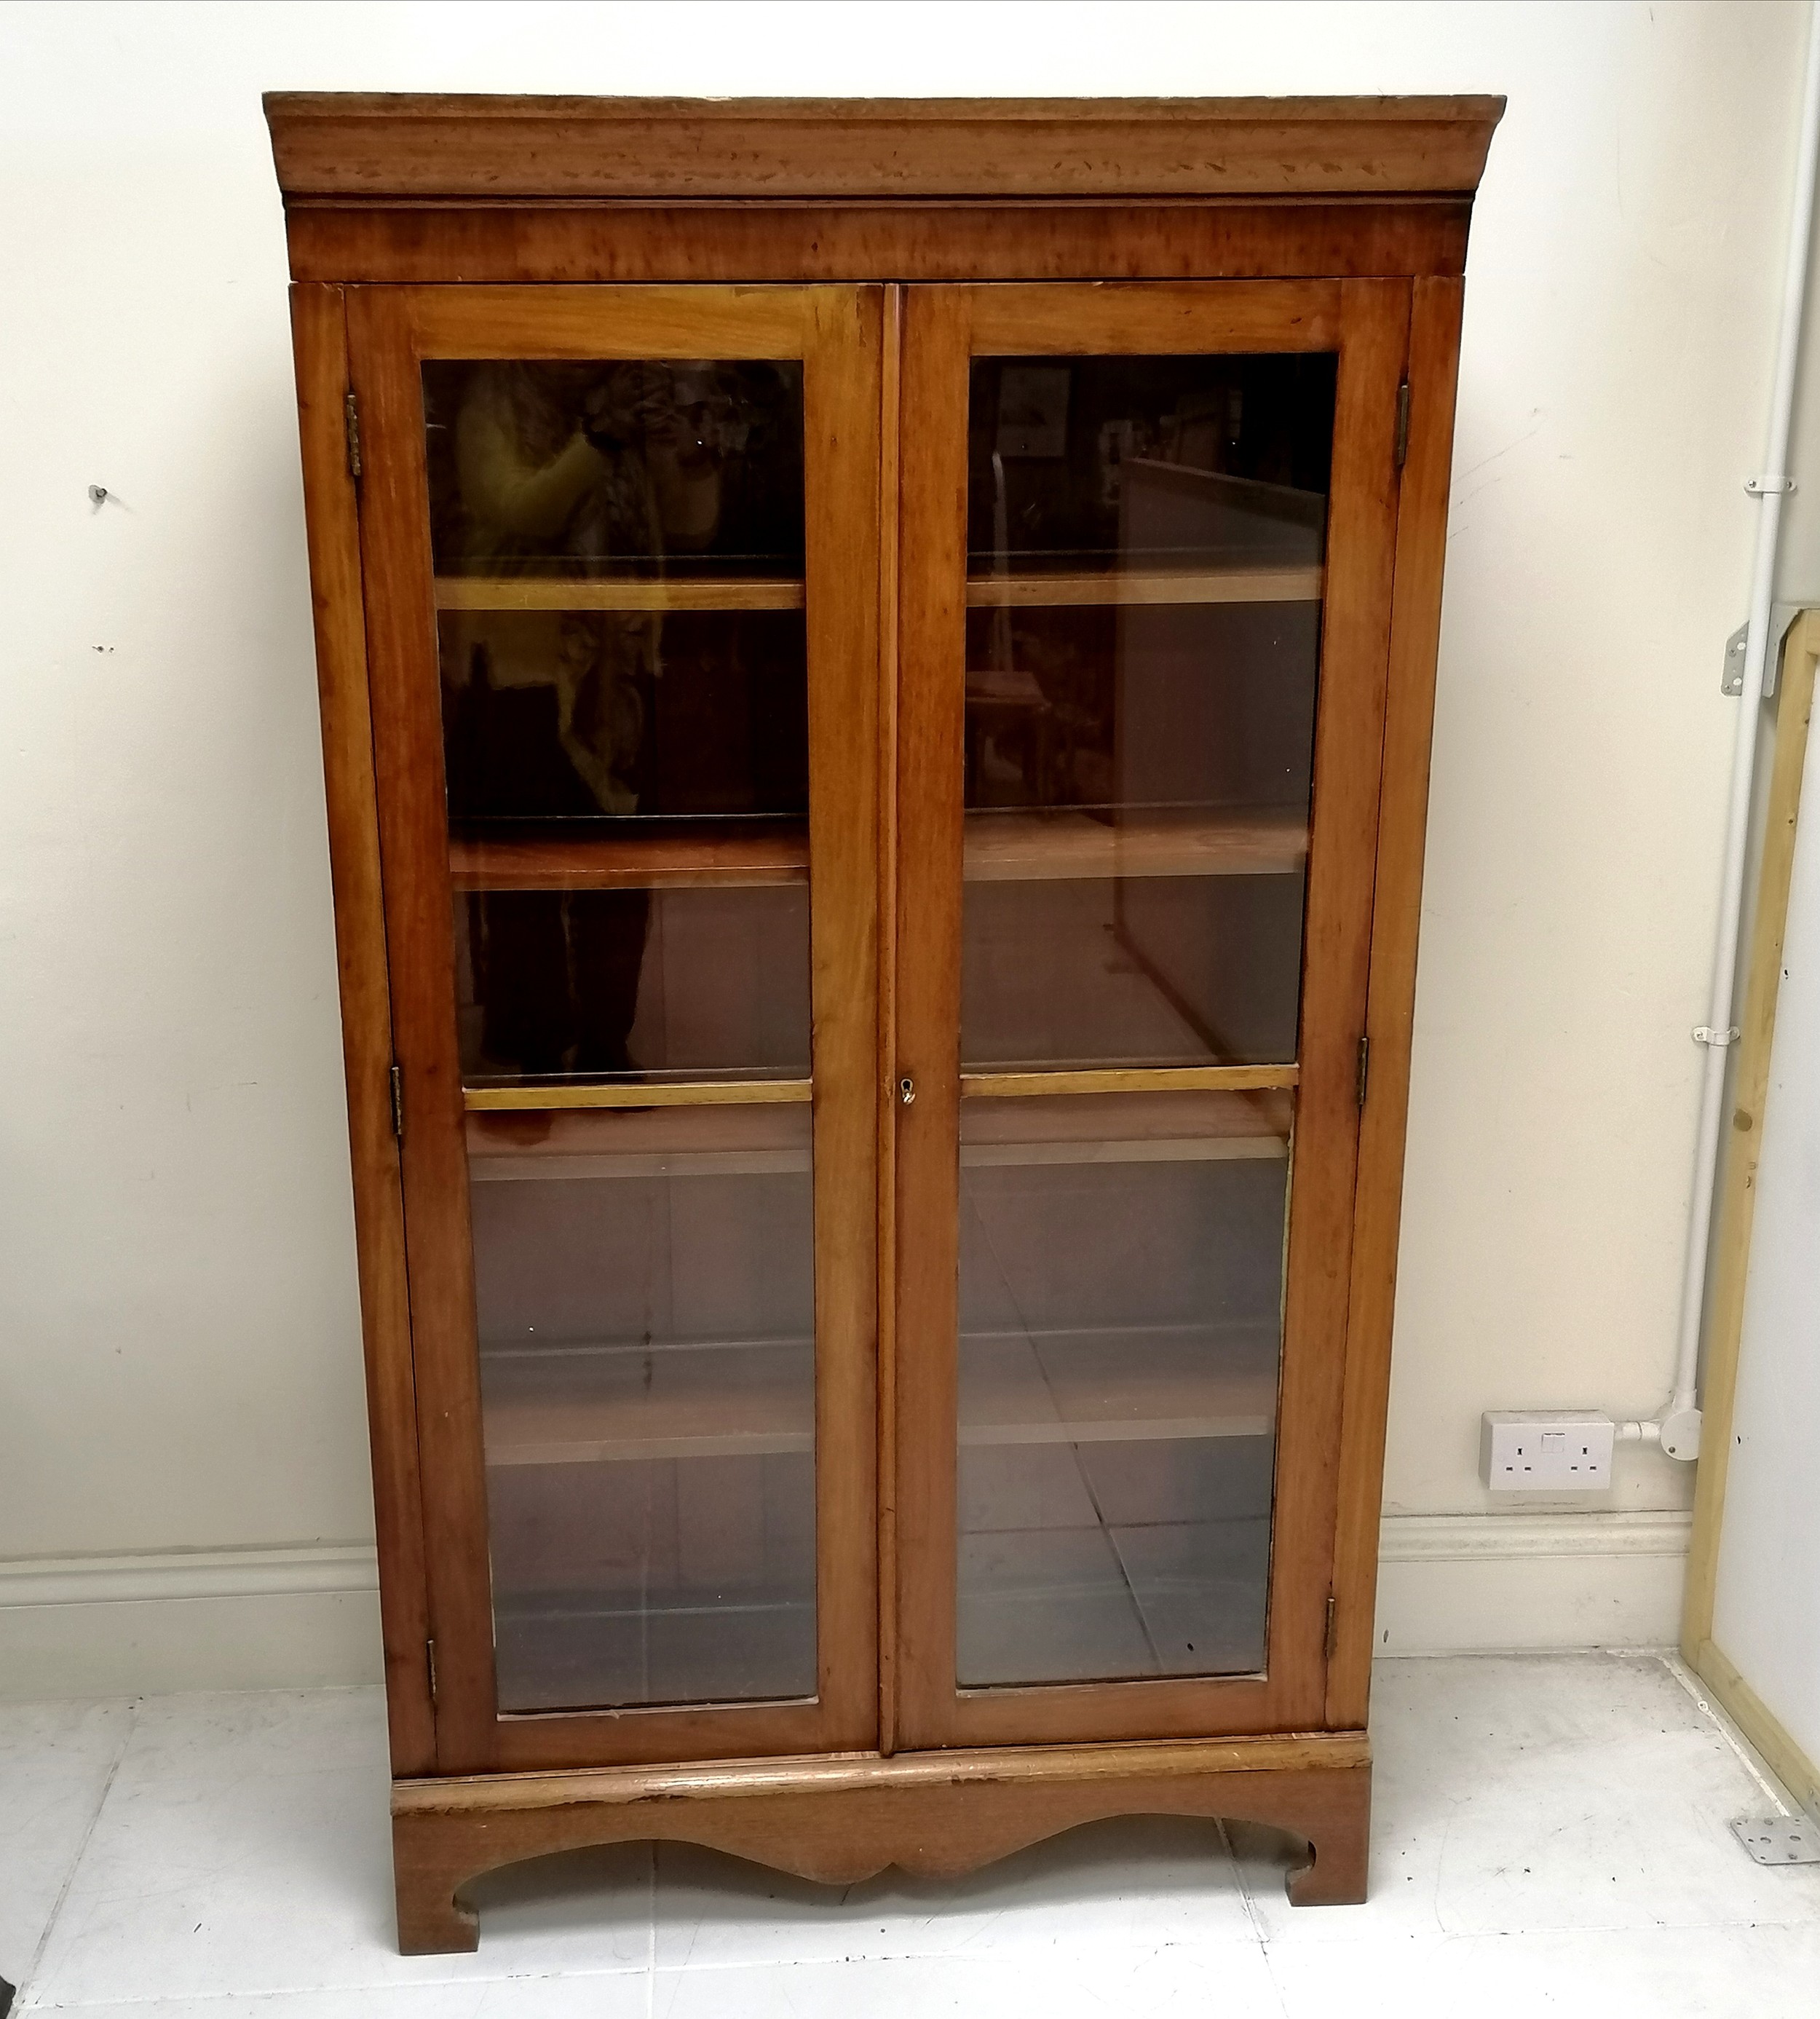 Antique mahogany 2 door glazed 4 shelf bookcase, on bracket feet, in used condition, 100 cm wide x - Image 2 of 5